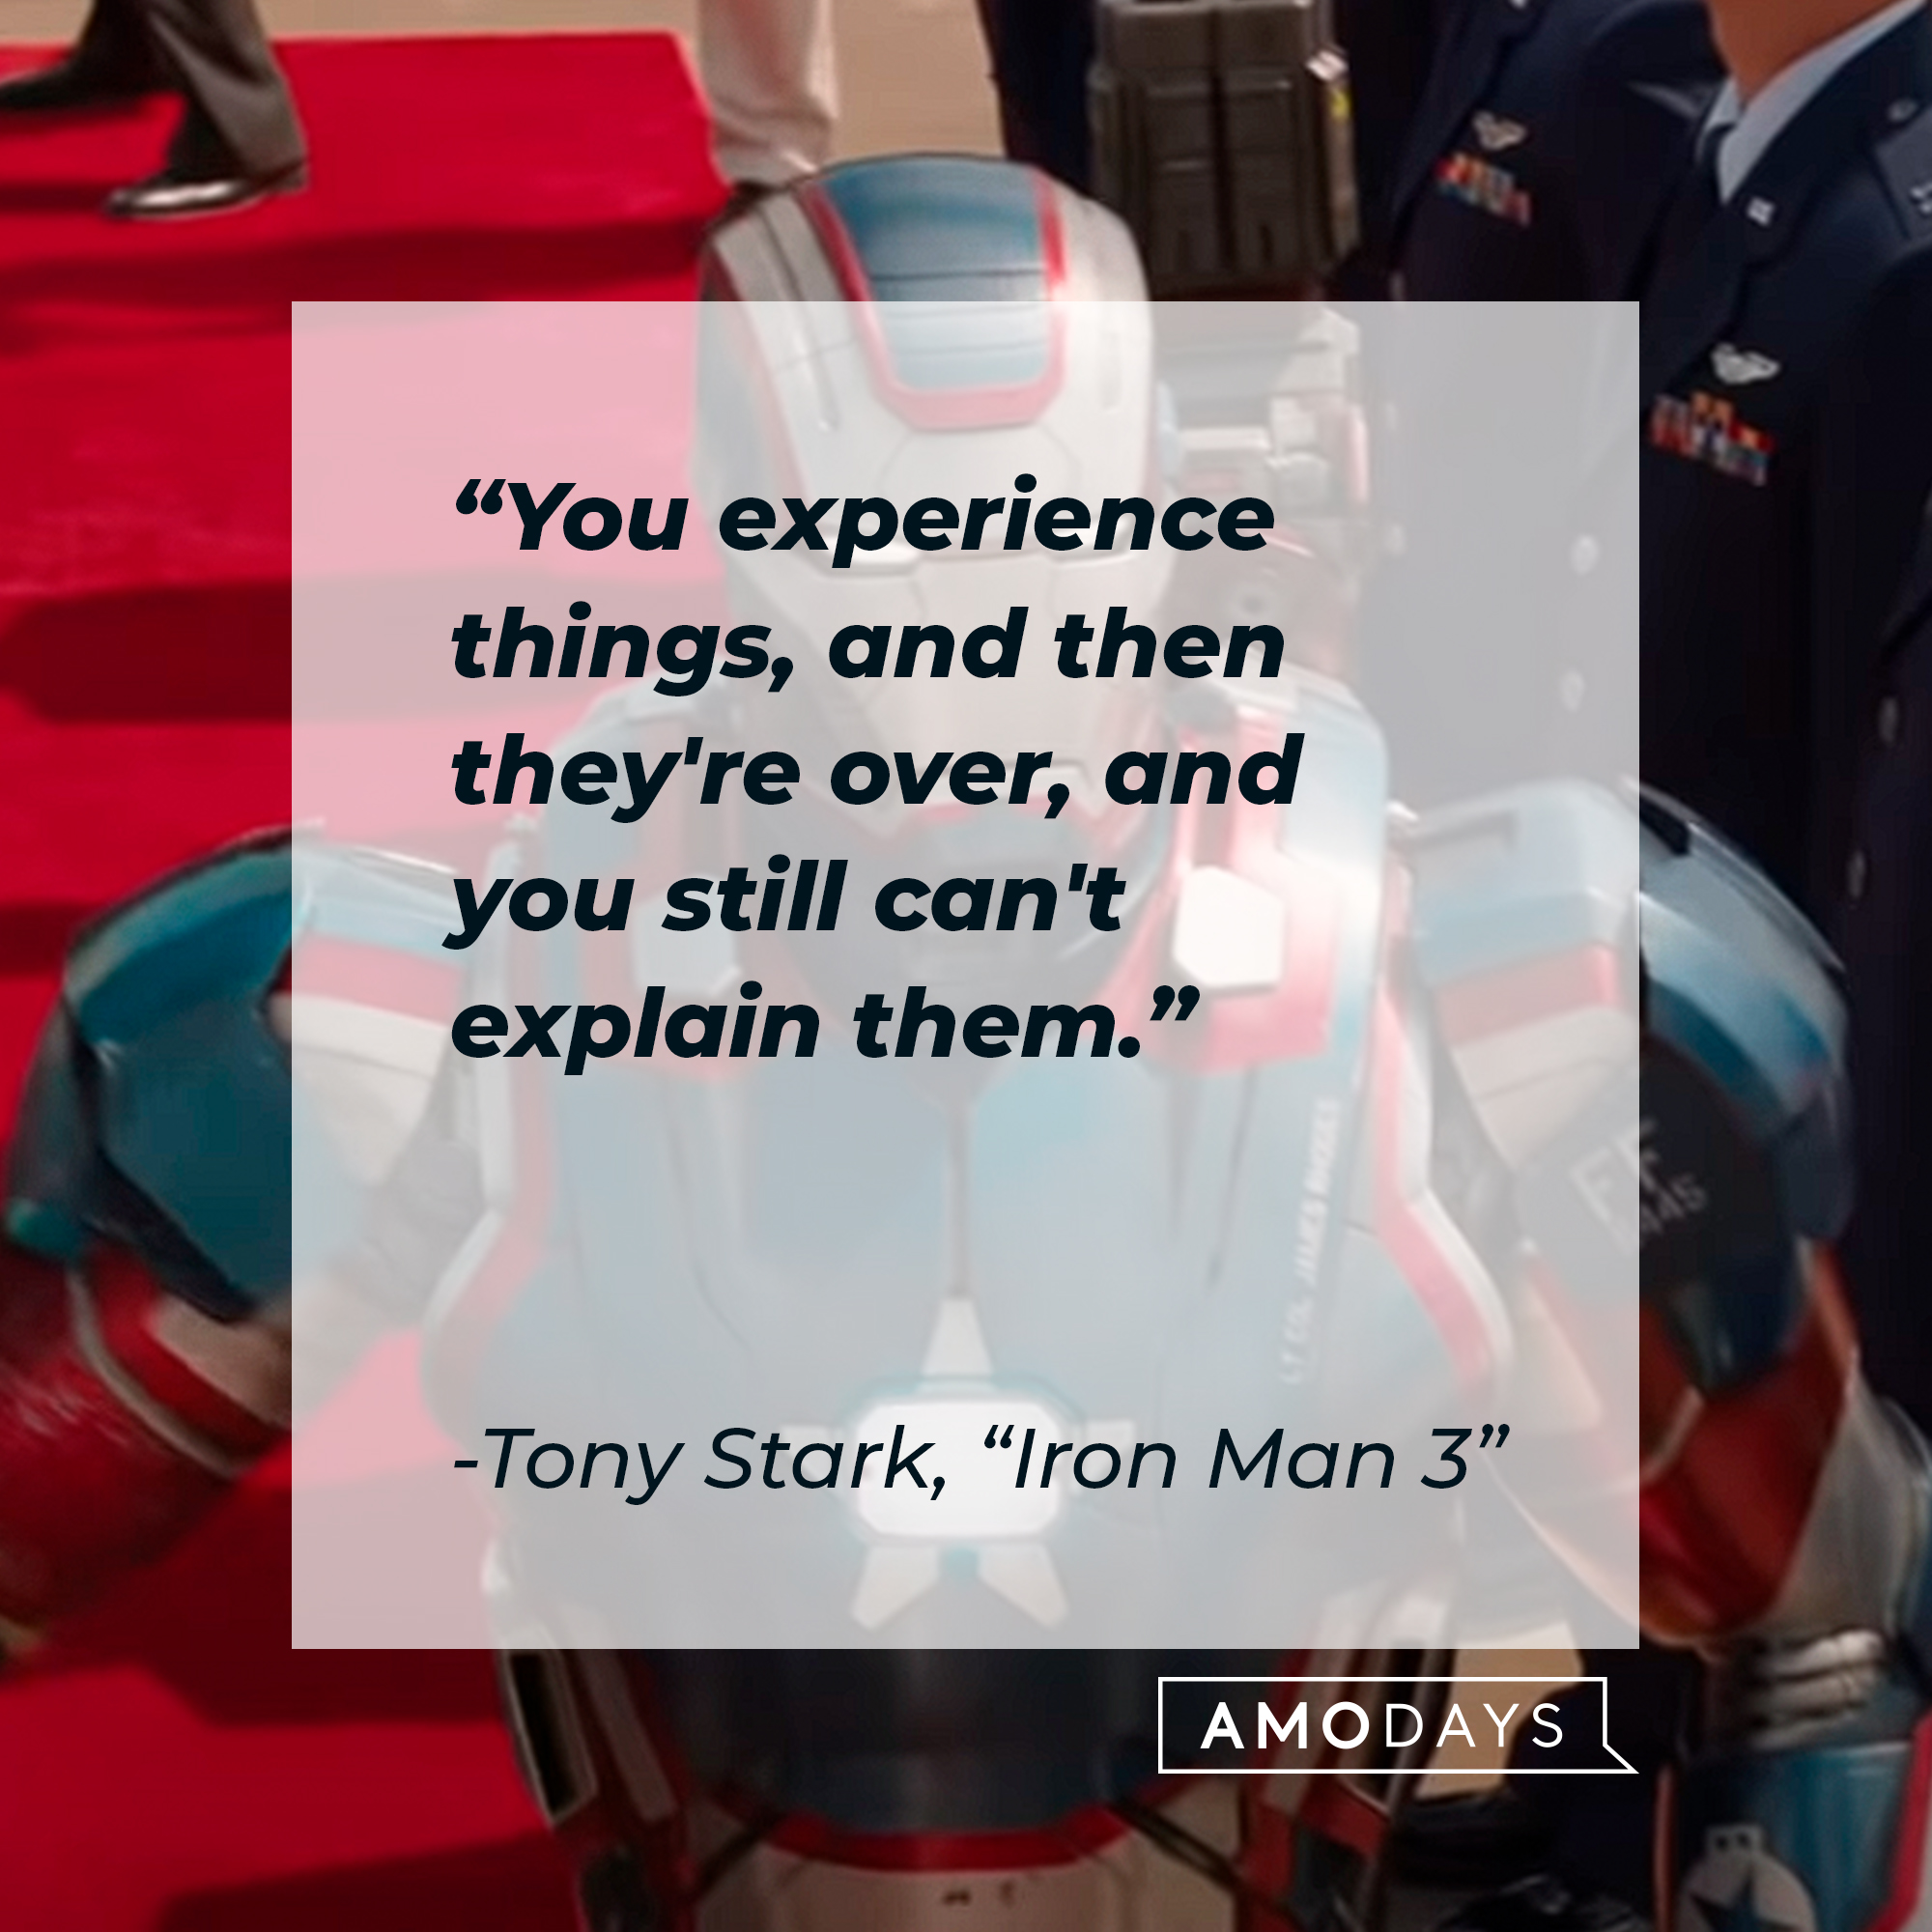 Tony Stark’s quote: "You experience things, and then they're over, and you still can't explain them." | Image: AmoDays